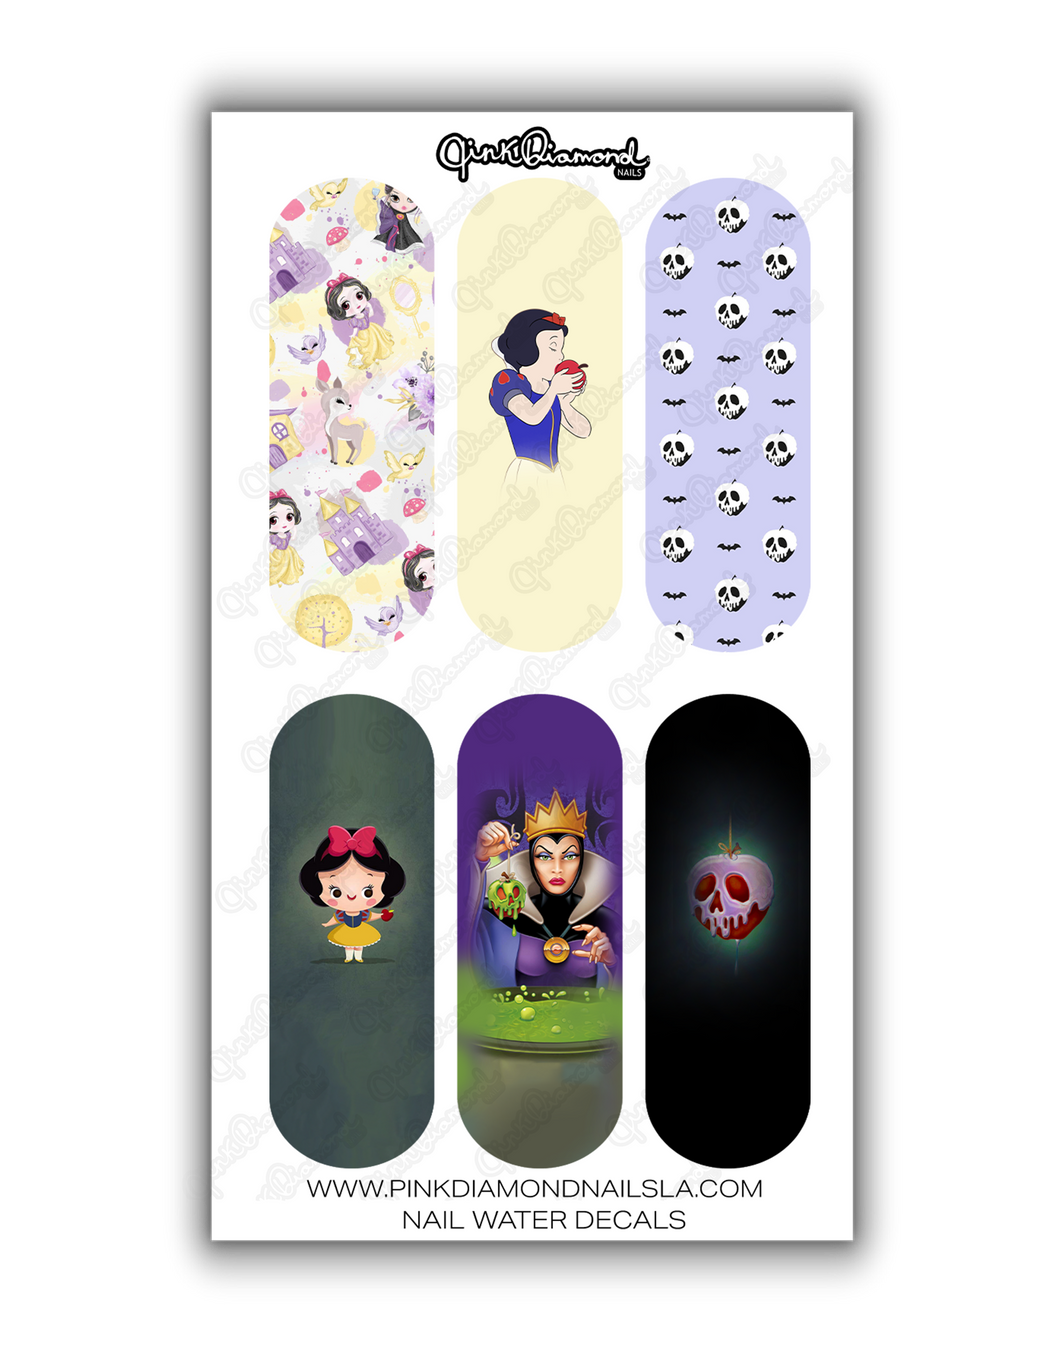 Nail water decals- XL Snow White & The evil queen